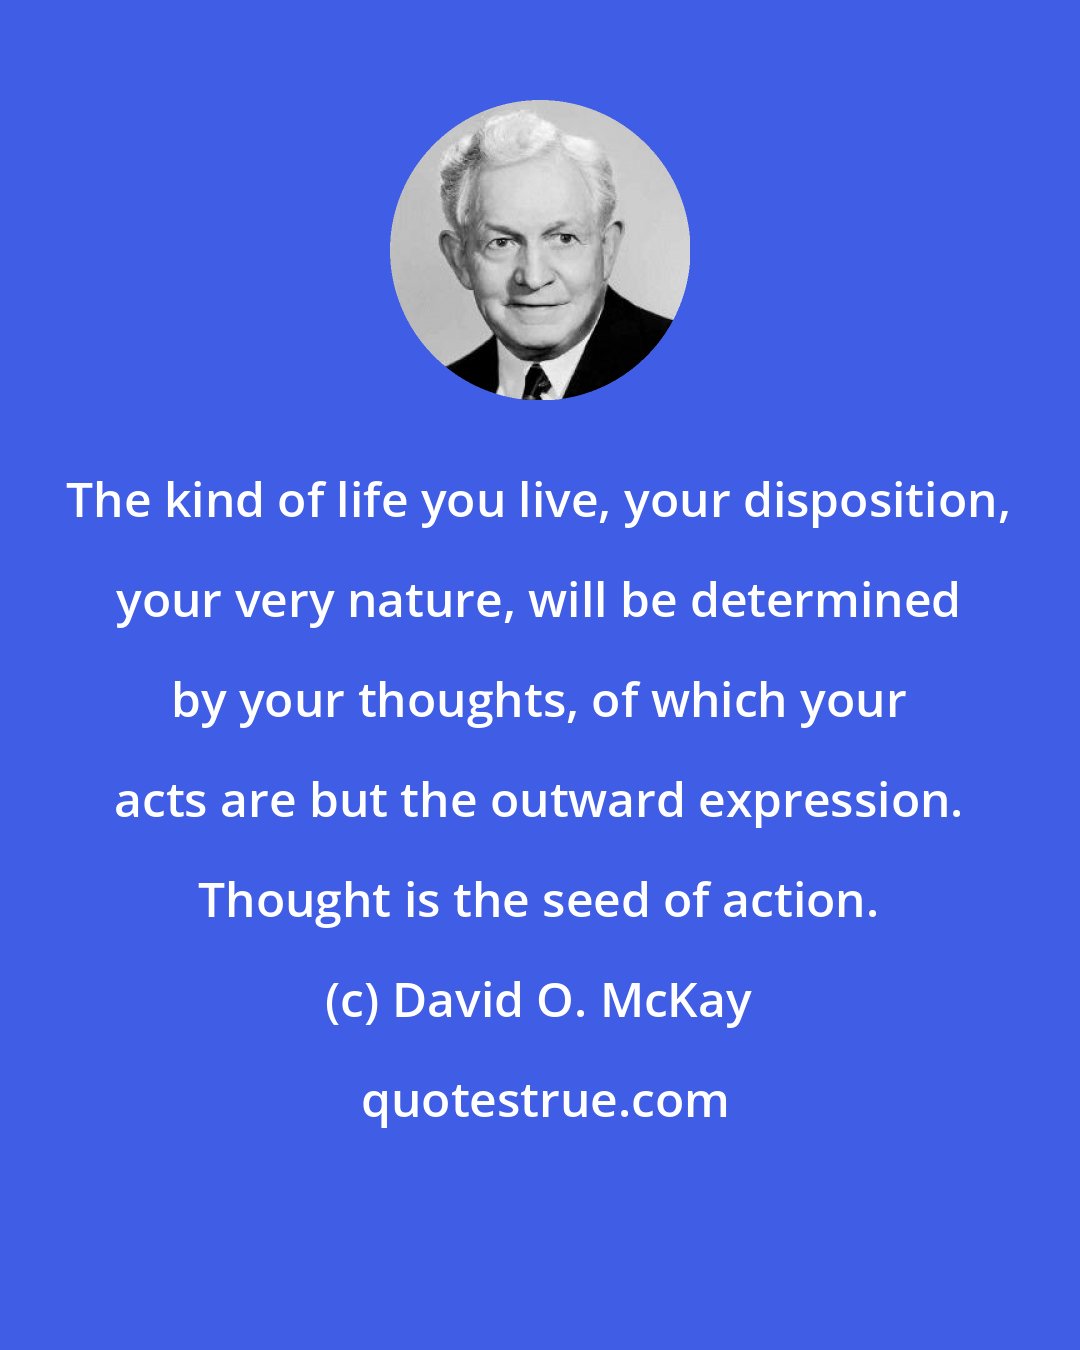 David O. McKay: The kind of life you live, your disposition, your very nature, will be determined by your thoughts, of which your acts are but the outward expression. Thought is the seed of action.